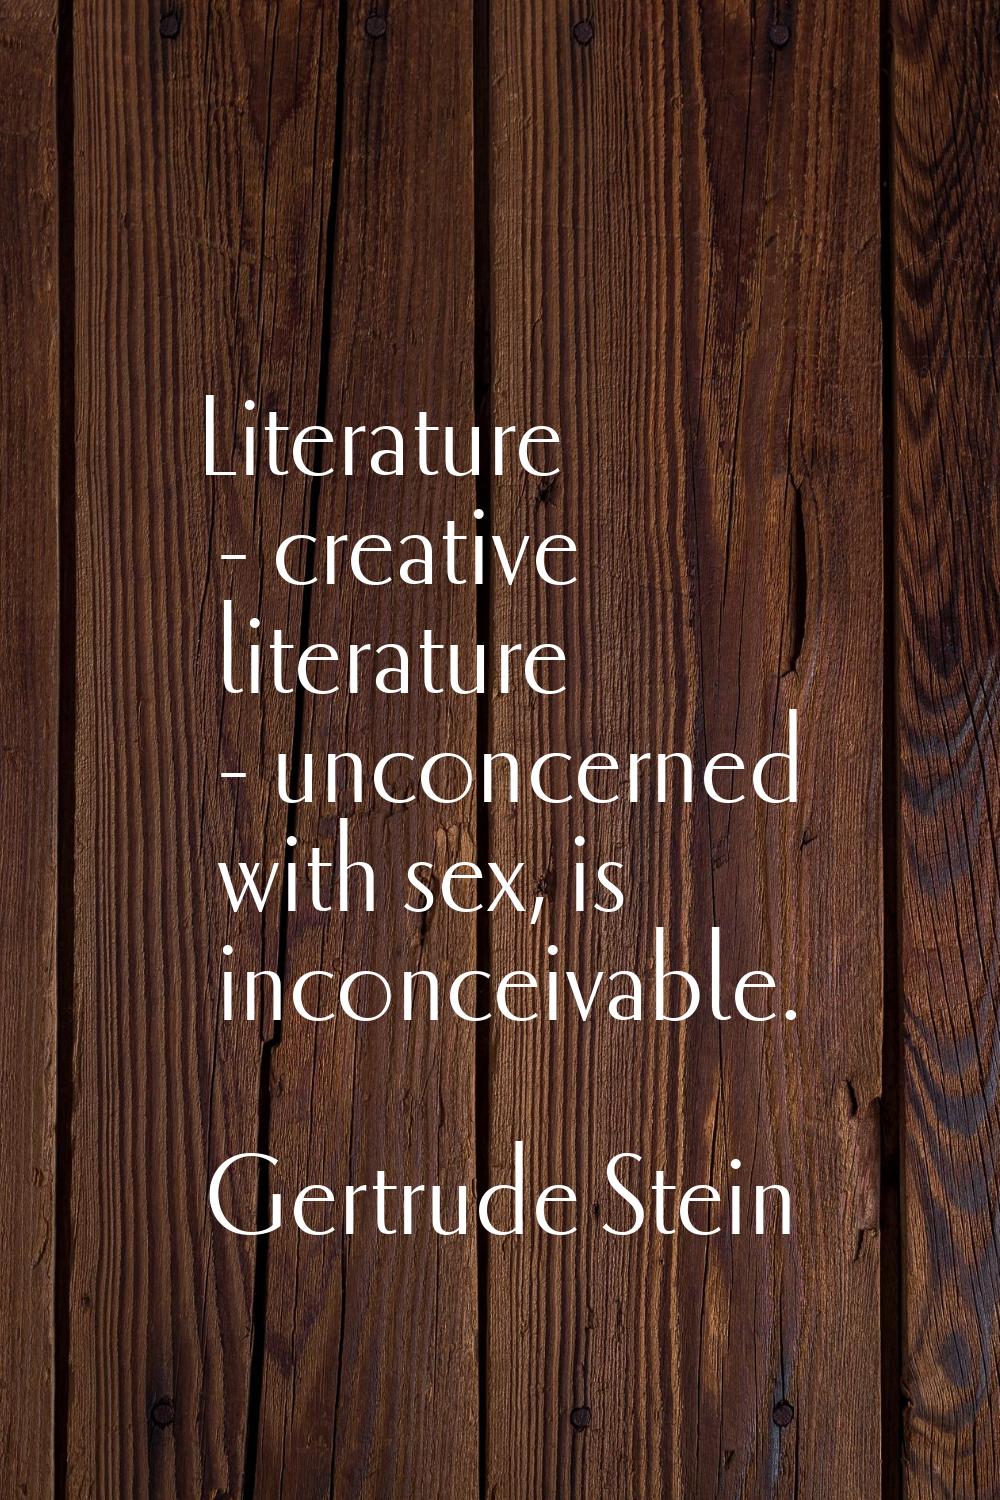 Literature - creative literature - unconcerned with sex, is inconceivable.